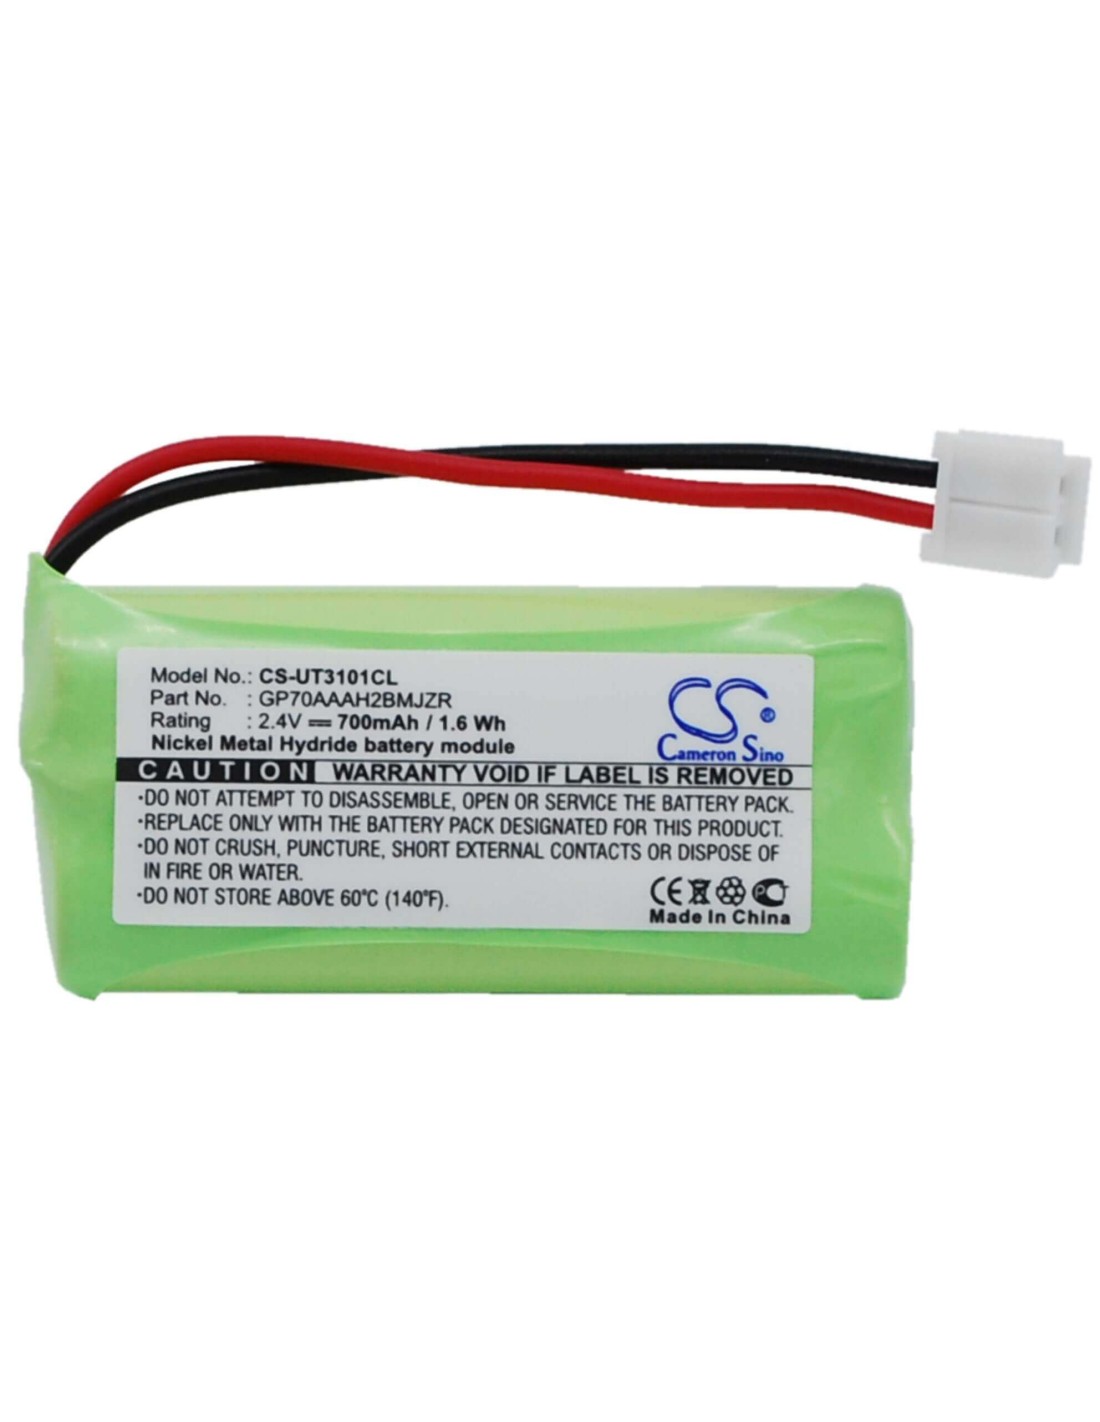 Compatible with VTech Cordless Phone Battery 700mAh 2.4V NI-MH 2 Pack Replacement for VTech 6052 Battery 